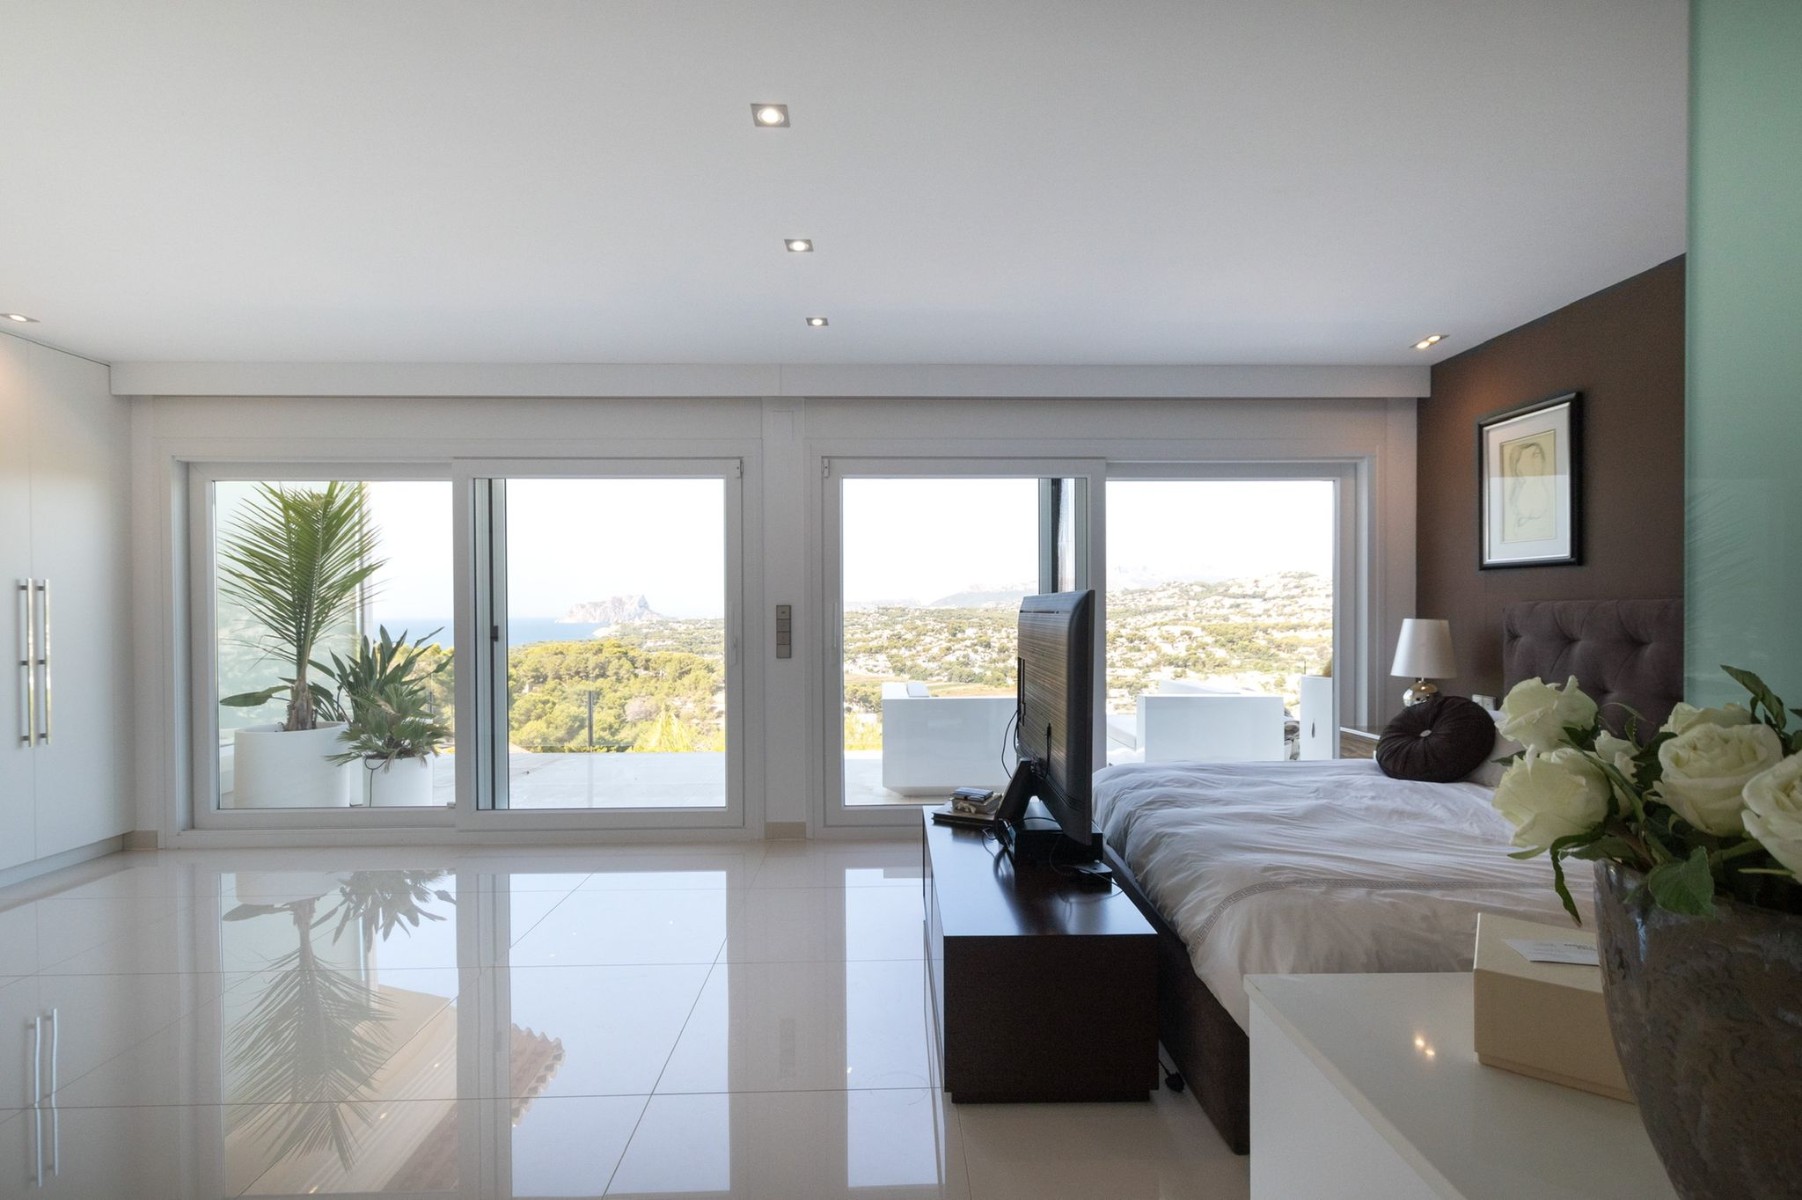 For Sale. New Construction in Moraira